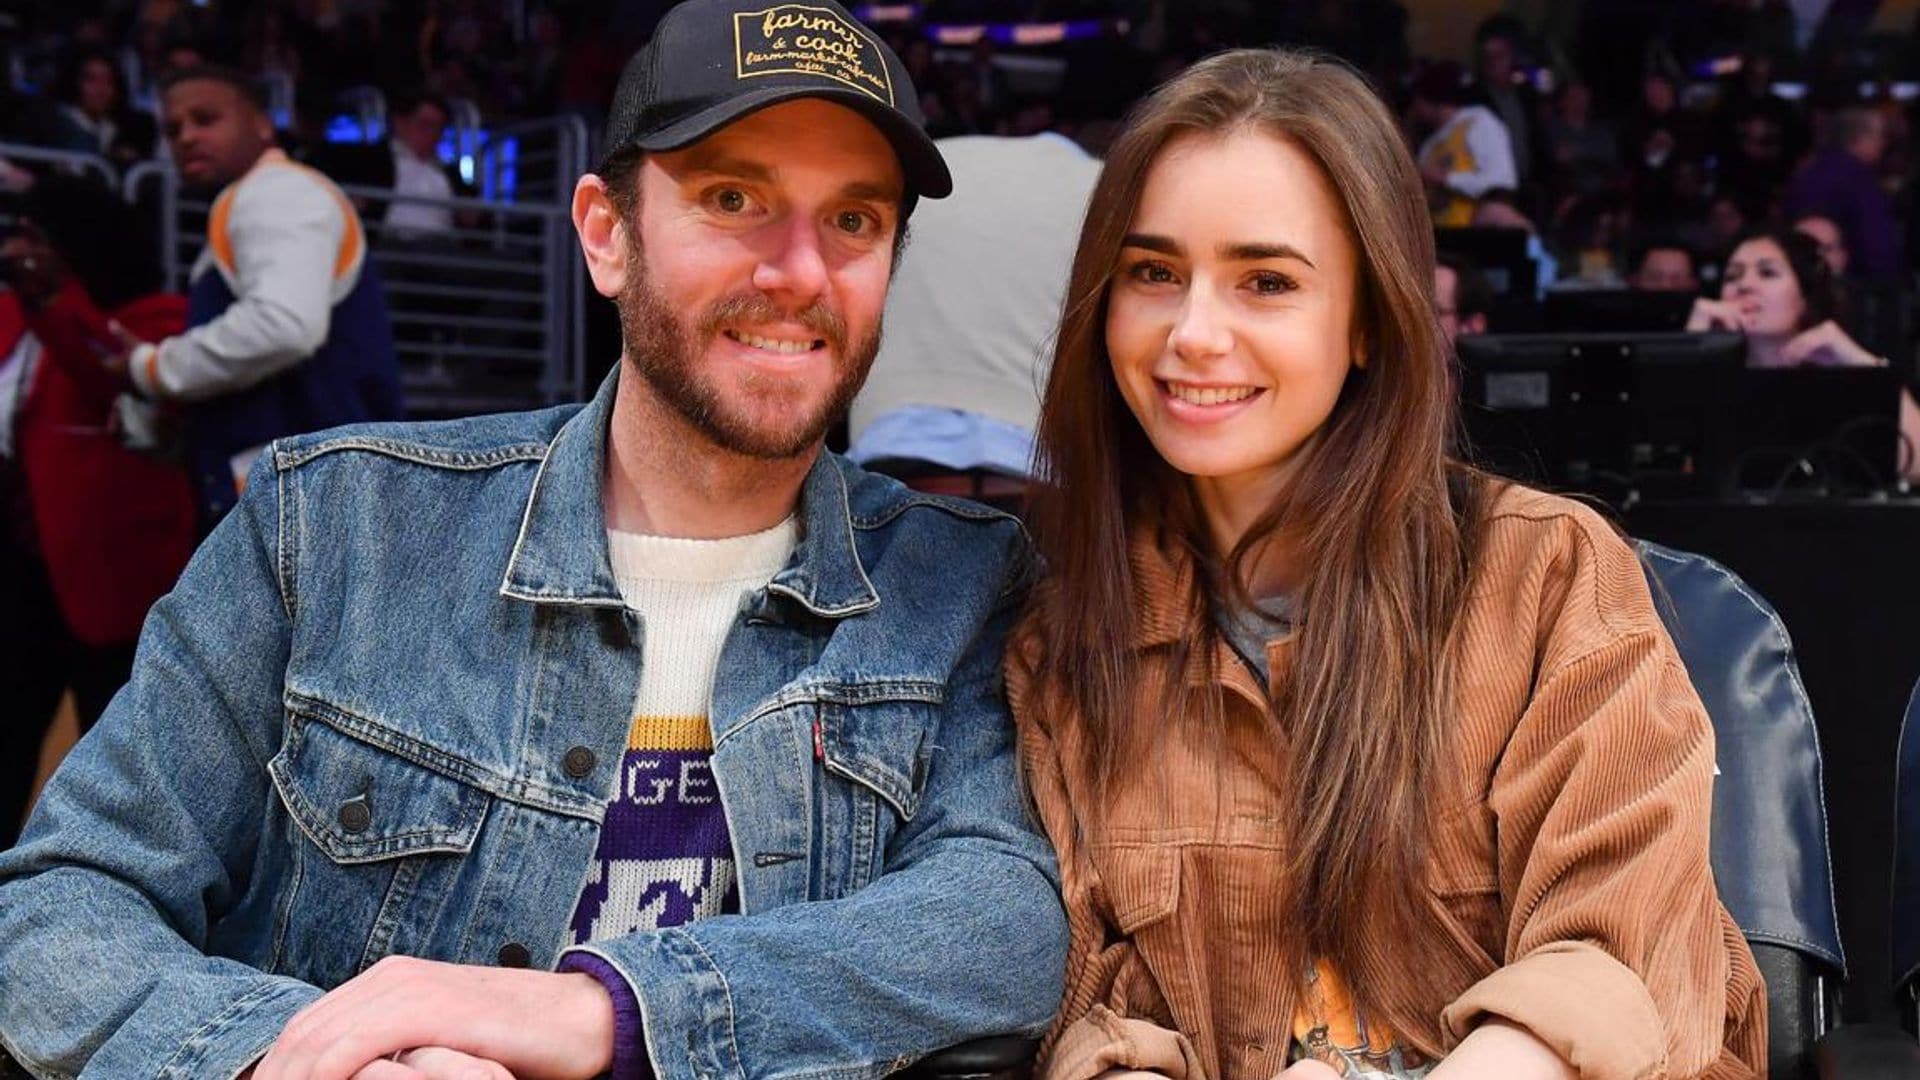 Lily Collins reveals details about her surprising marriage proposal